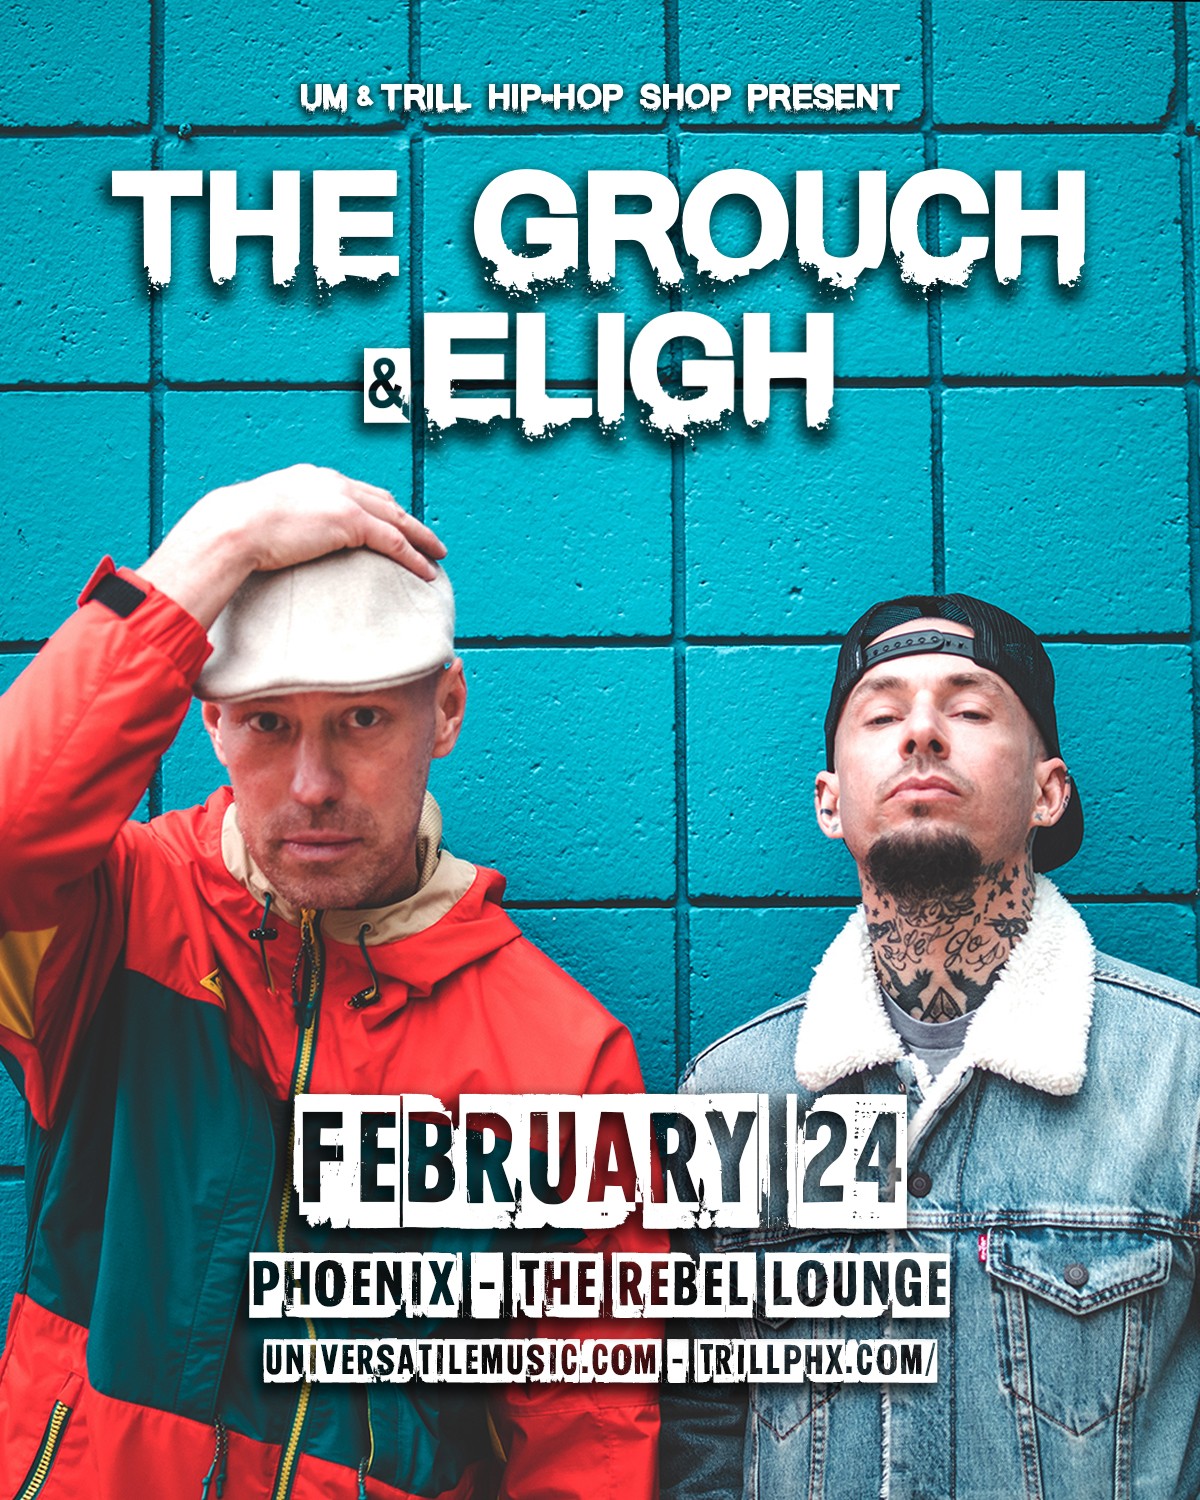 The Grouch and Eligh